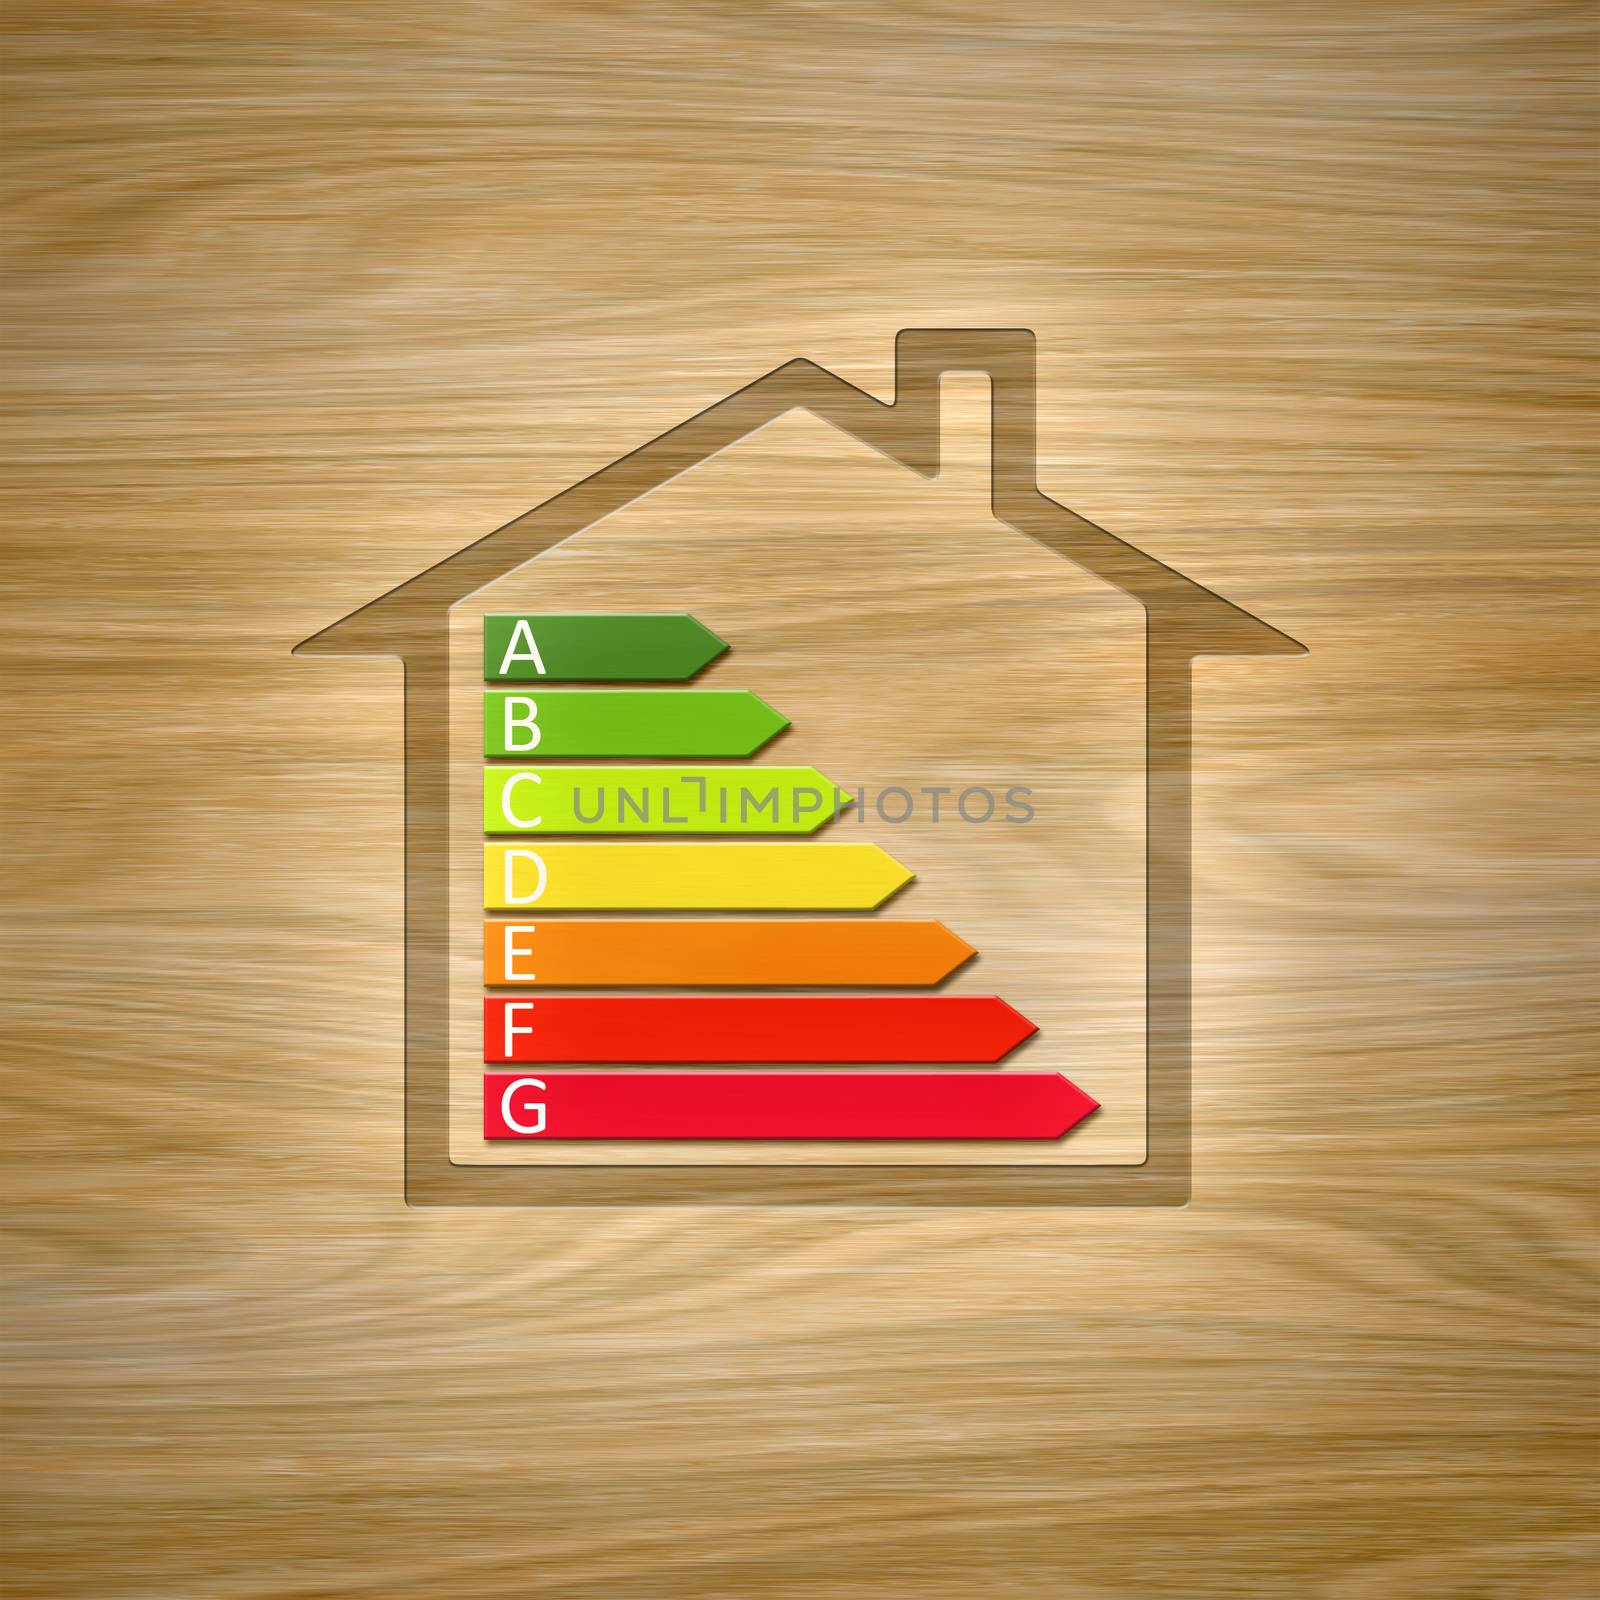 An image of a wooden house with energy efficiency graph